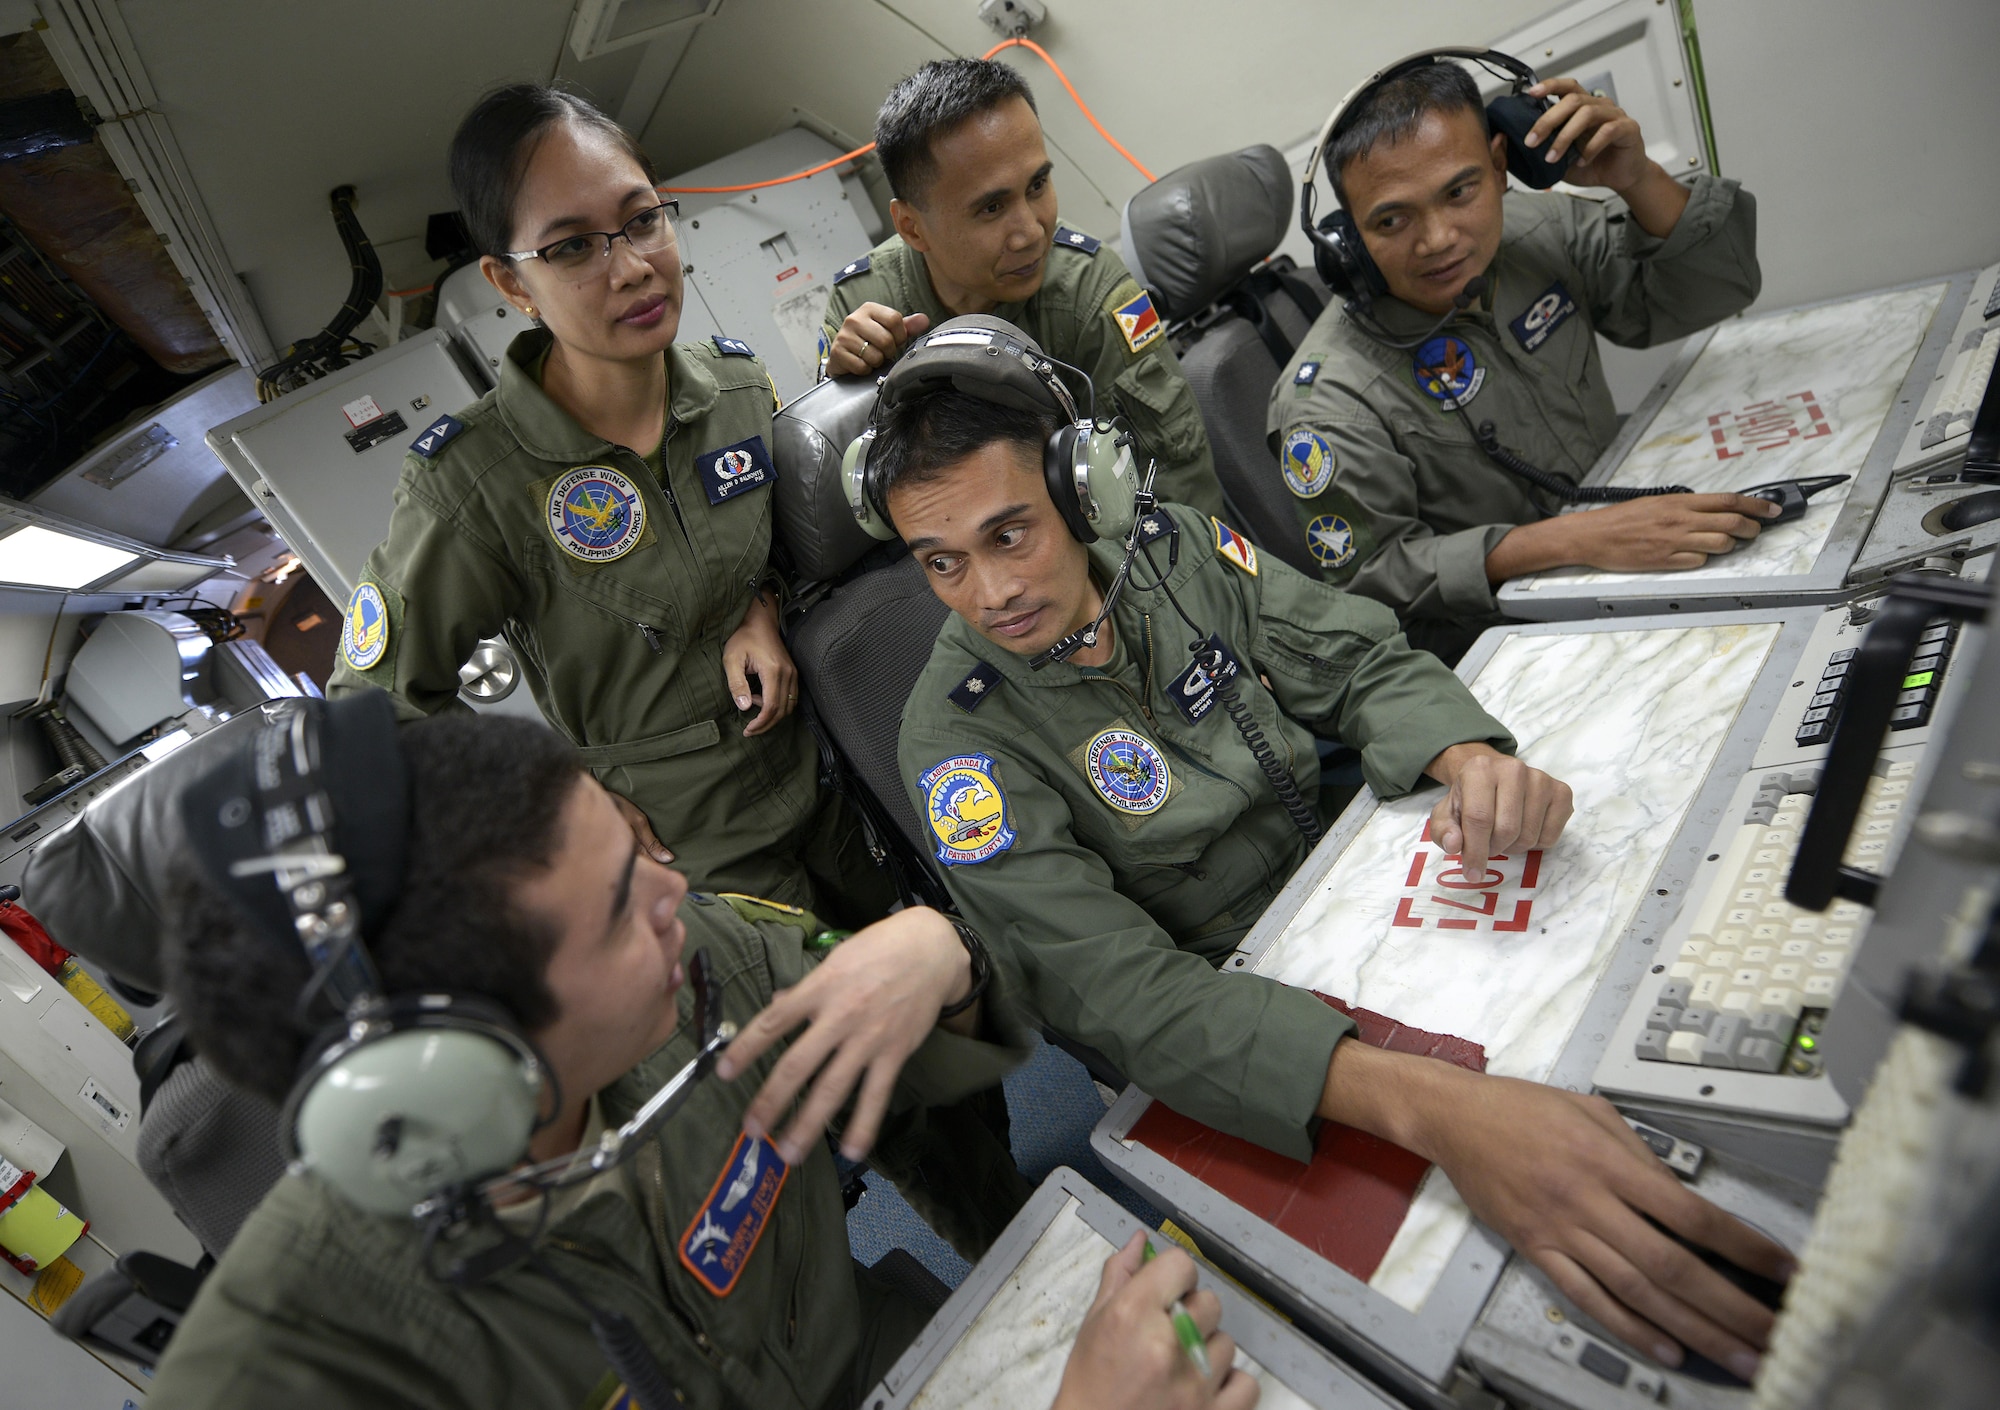 1st Lt. Andrew Stokes (left), a 961st Airborne Air Control Squadron (AACS) air weapons officer, speaks with Philippine Air Force Maj. Frederick Facia, the 581st Aircraft Control and Training Squadron commander, and other PAF air battle managers while onboard a 961st AACS E-3 Sentry AWACS during exercise Balikatan 2015 over the Philippines April 23, 2015. This exercise marks the first time in history that PAF air battle managers have controlled other aircraft while on board the AWACS. Since the exercise began, April 20, 2015, the 961st AACS has integrated 20 PAF weapons controllers during their missions in order to provide them with firsthand experience using the aircraft’s systems. The 961st AACS is stationed at Kadena Air Base, Japan. (U.S. Air Force photo/Staff Sgt. Maeson L. Elleman)